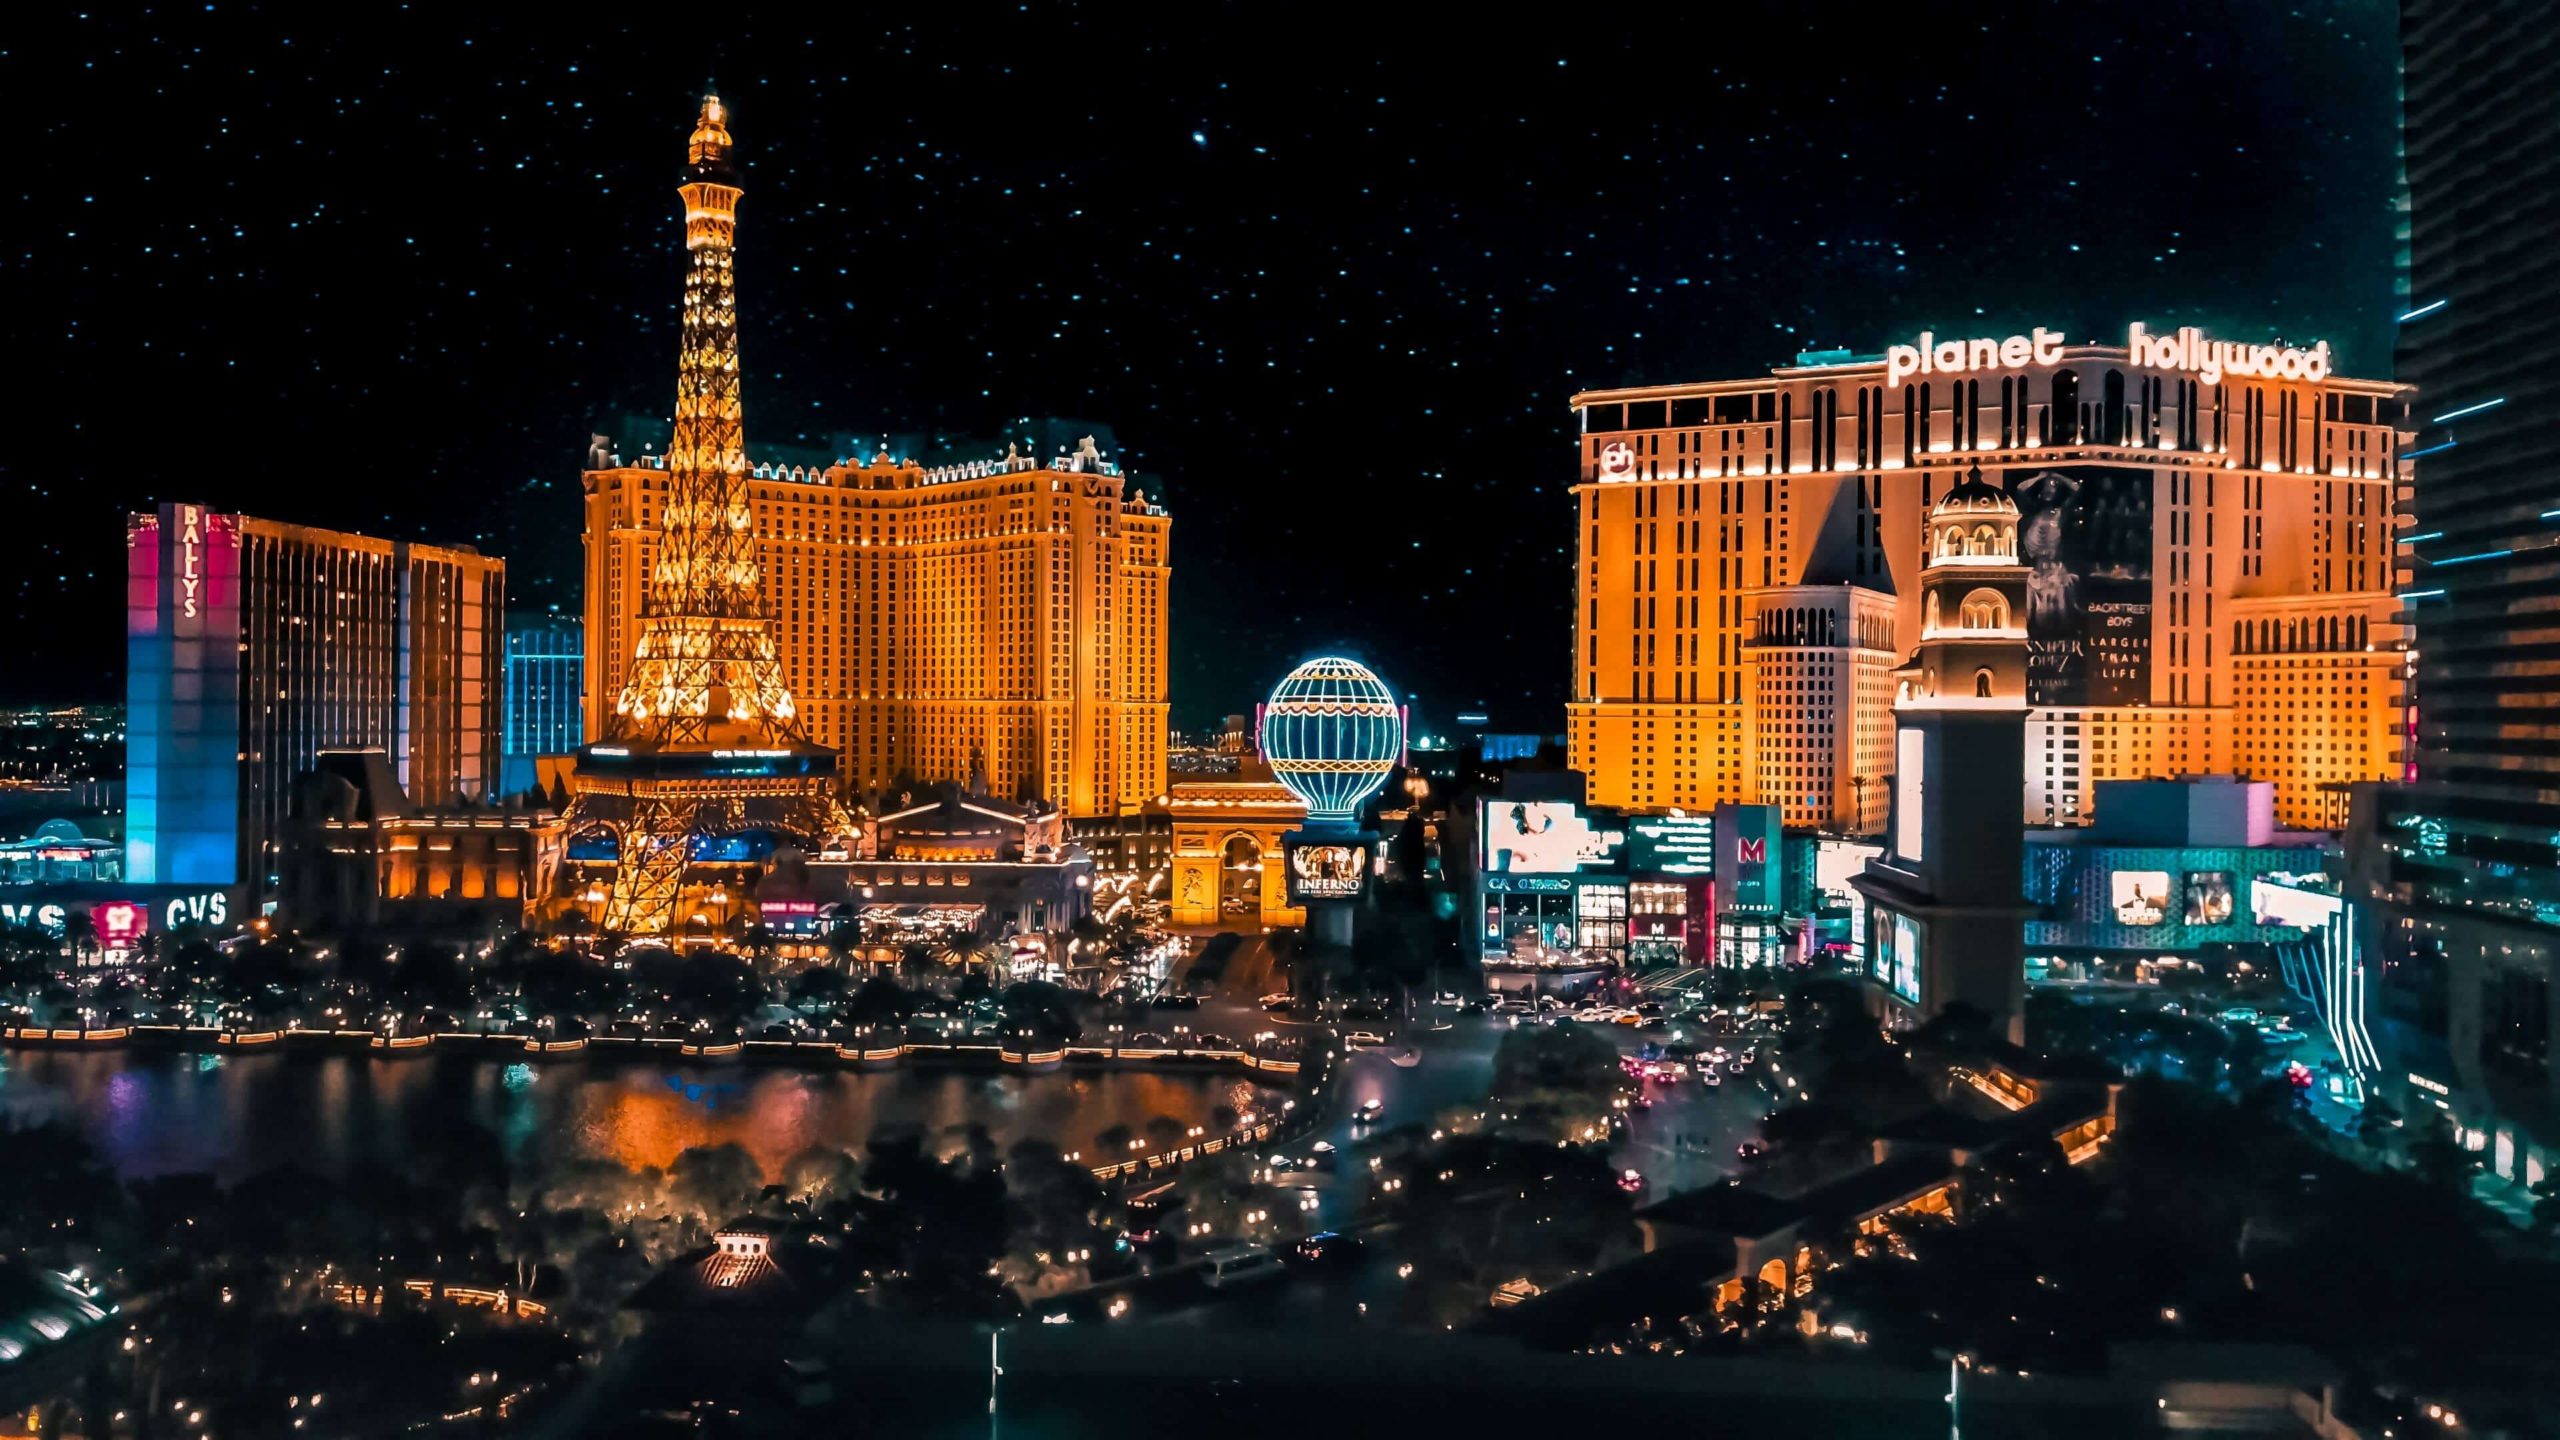 Neon lights, such as those on the Las Vegas strip seen here, are another light source.